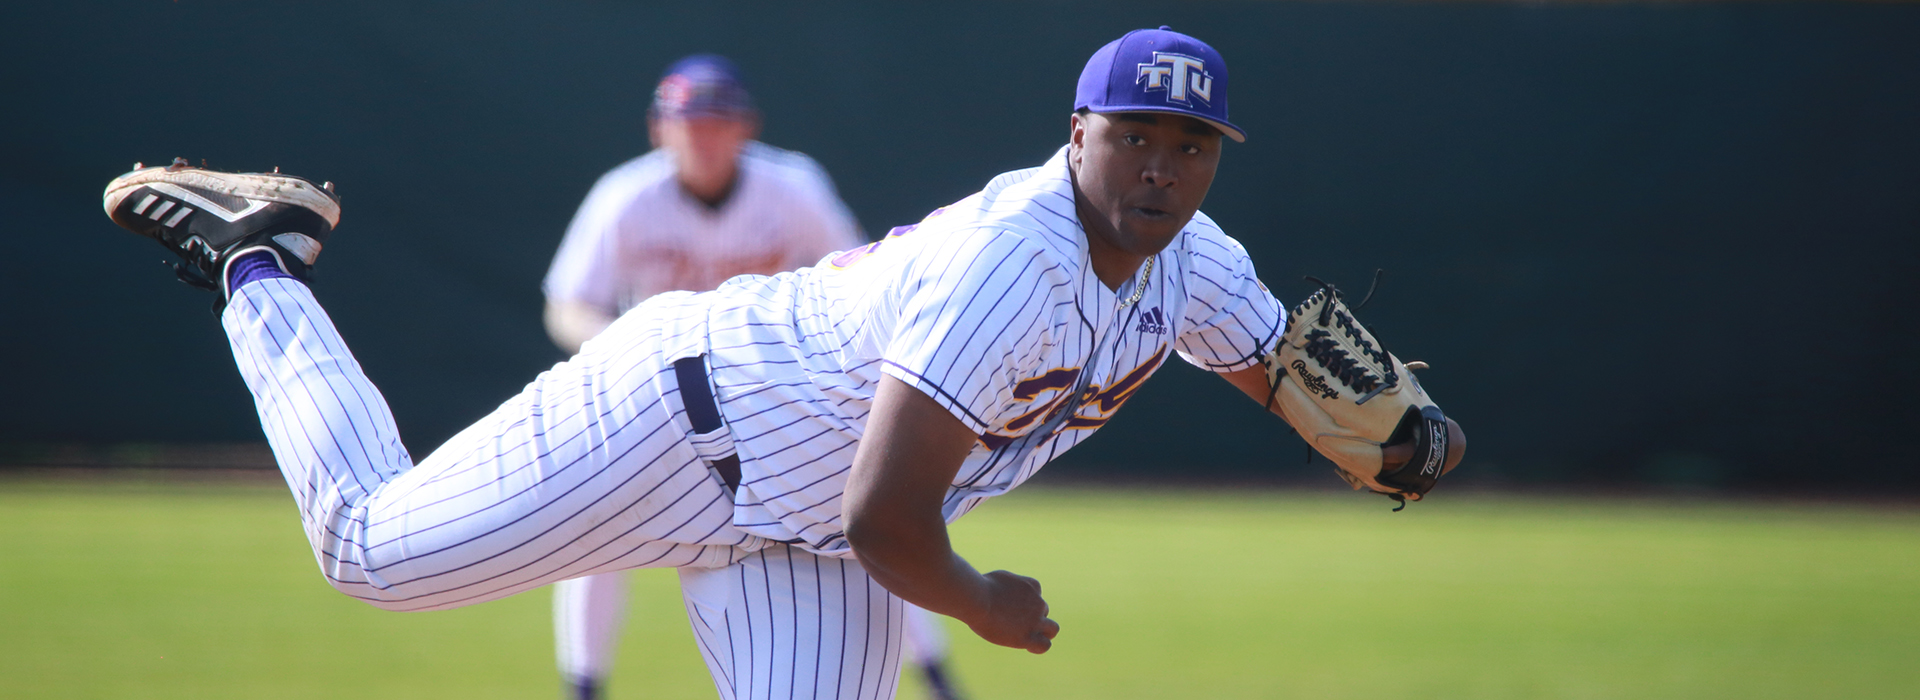 Golden Eagles take on in-state rival UT Martin in final OVC road series of season